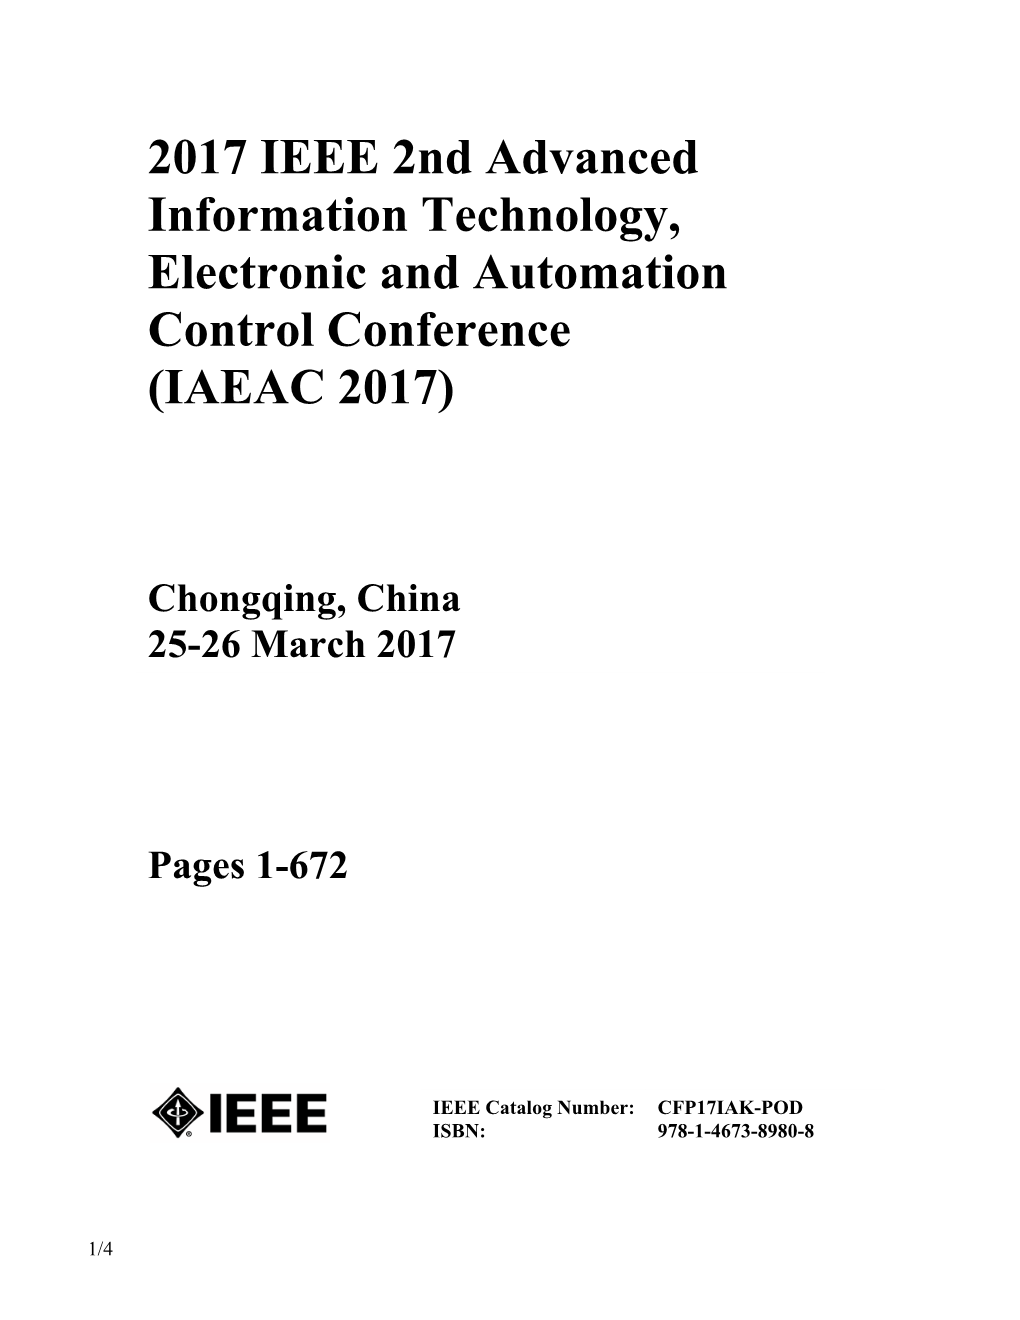 2017 IEEE 2Nd Advanced Information Technology, Electronic and Automation Control Conference (IAEAC 2017)